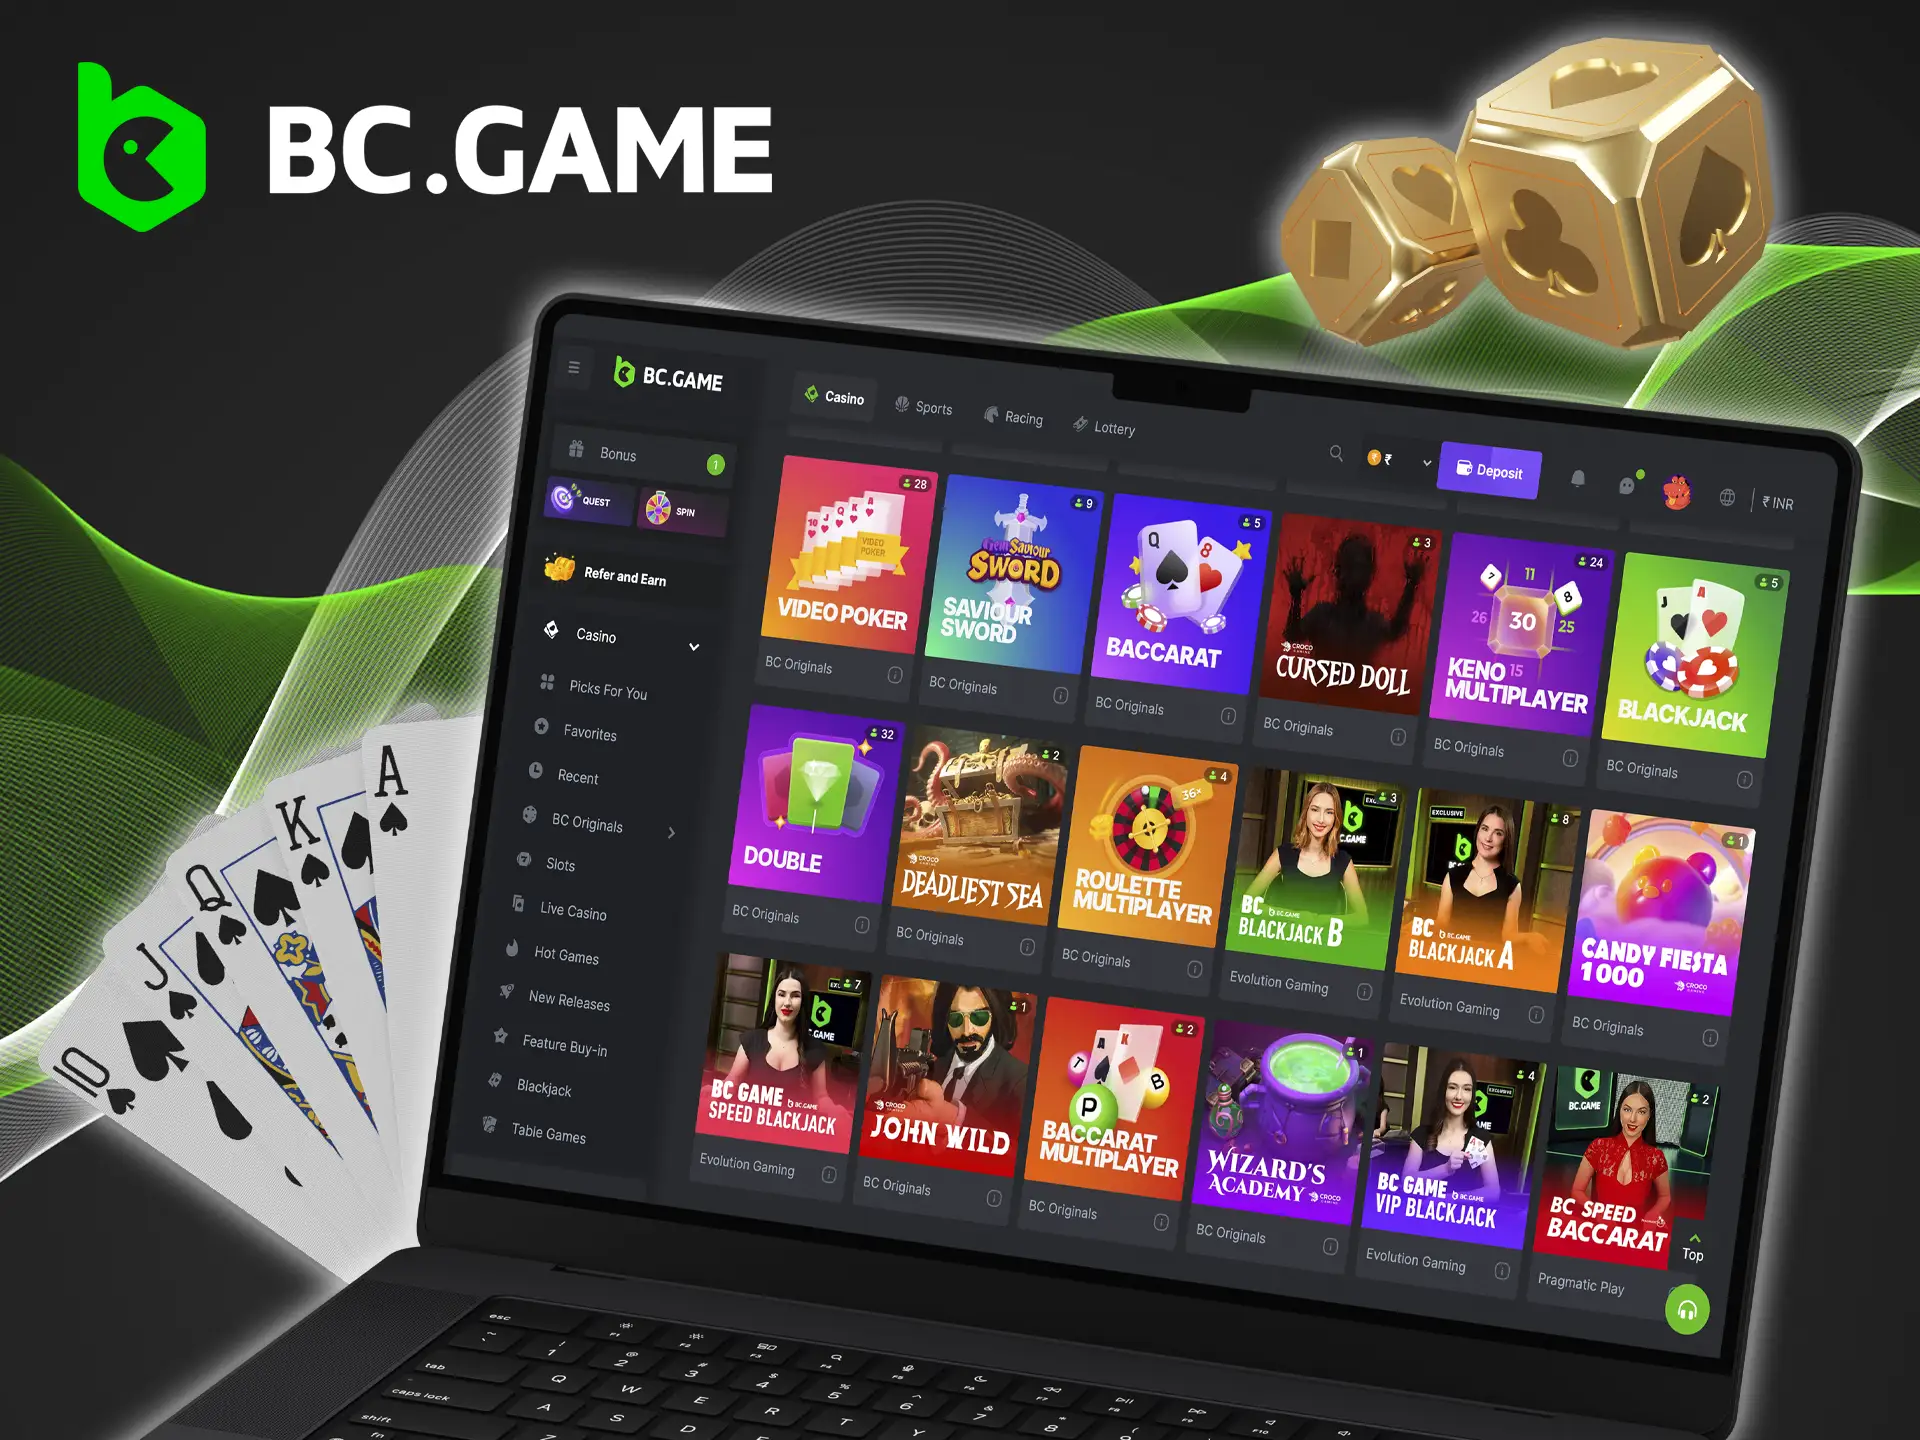 Choose the most attractive game from the list of games and spin the slot until you get the bonus from BC Game.